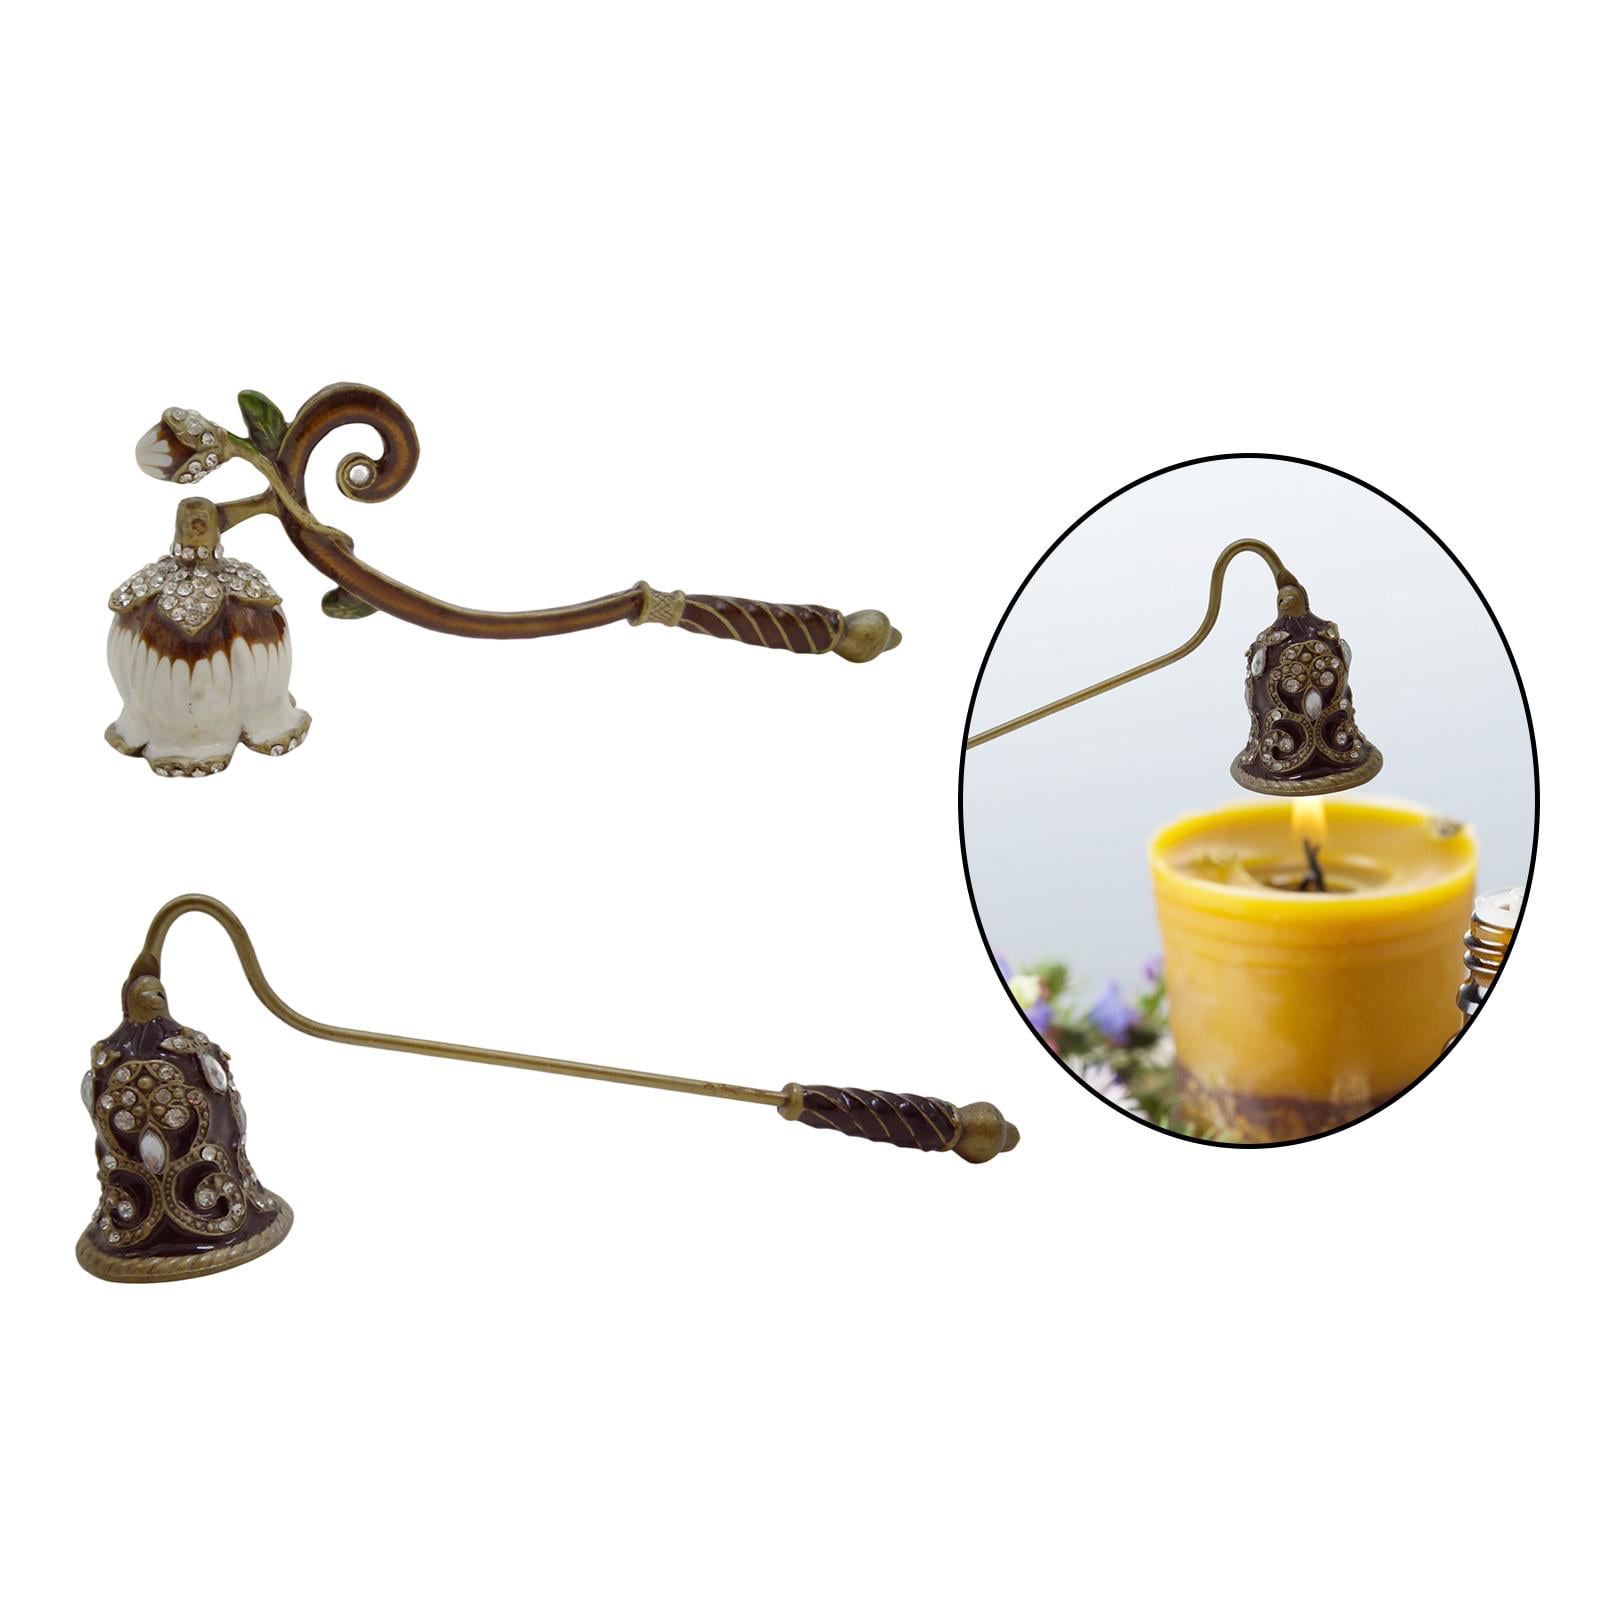 A Candle Snuffer Is the Small Luxury Makes Winter More Bearable